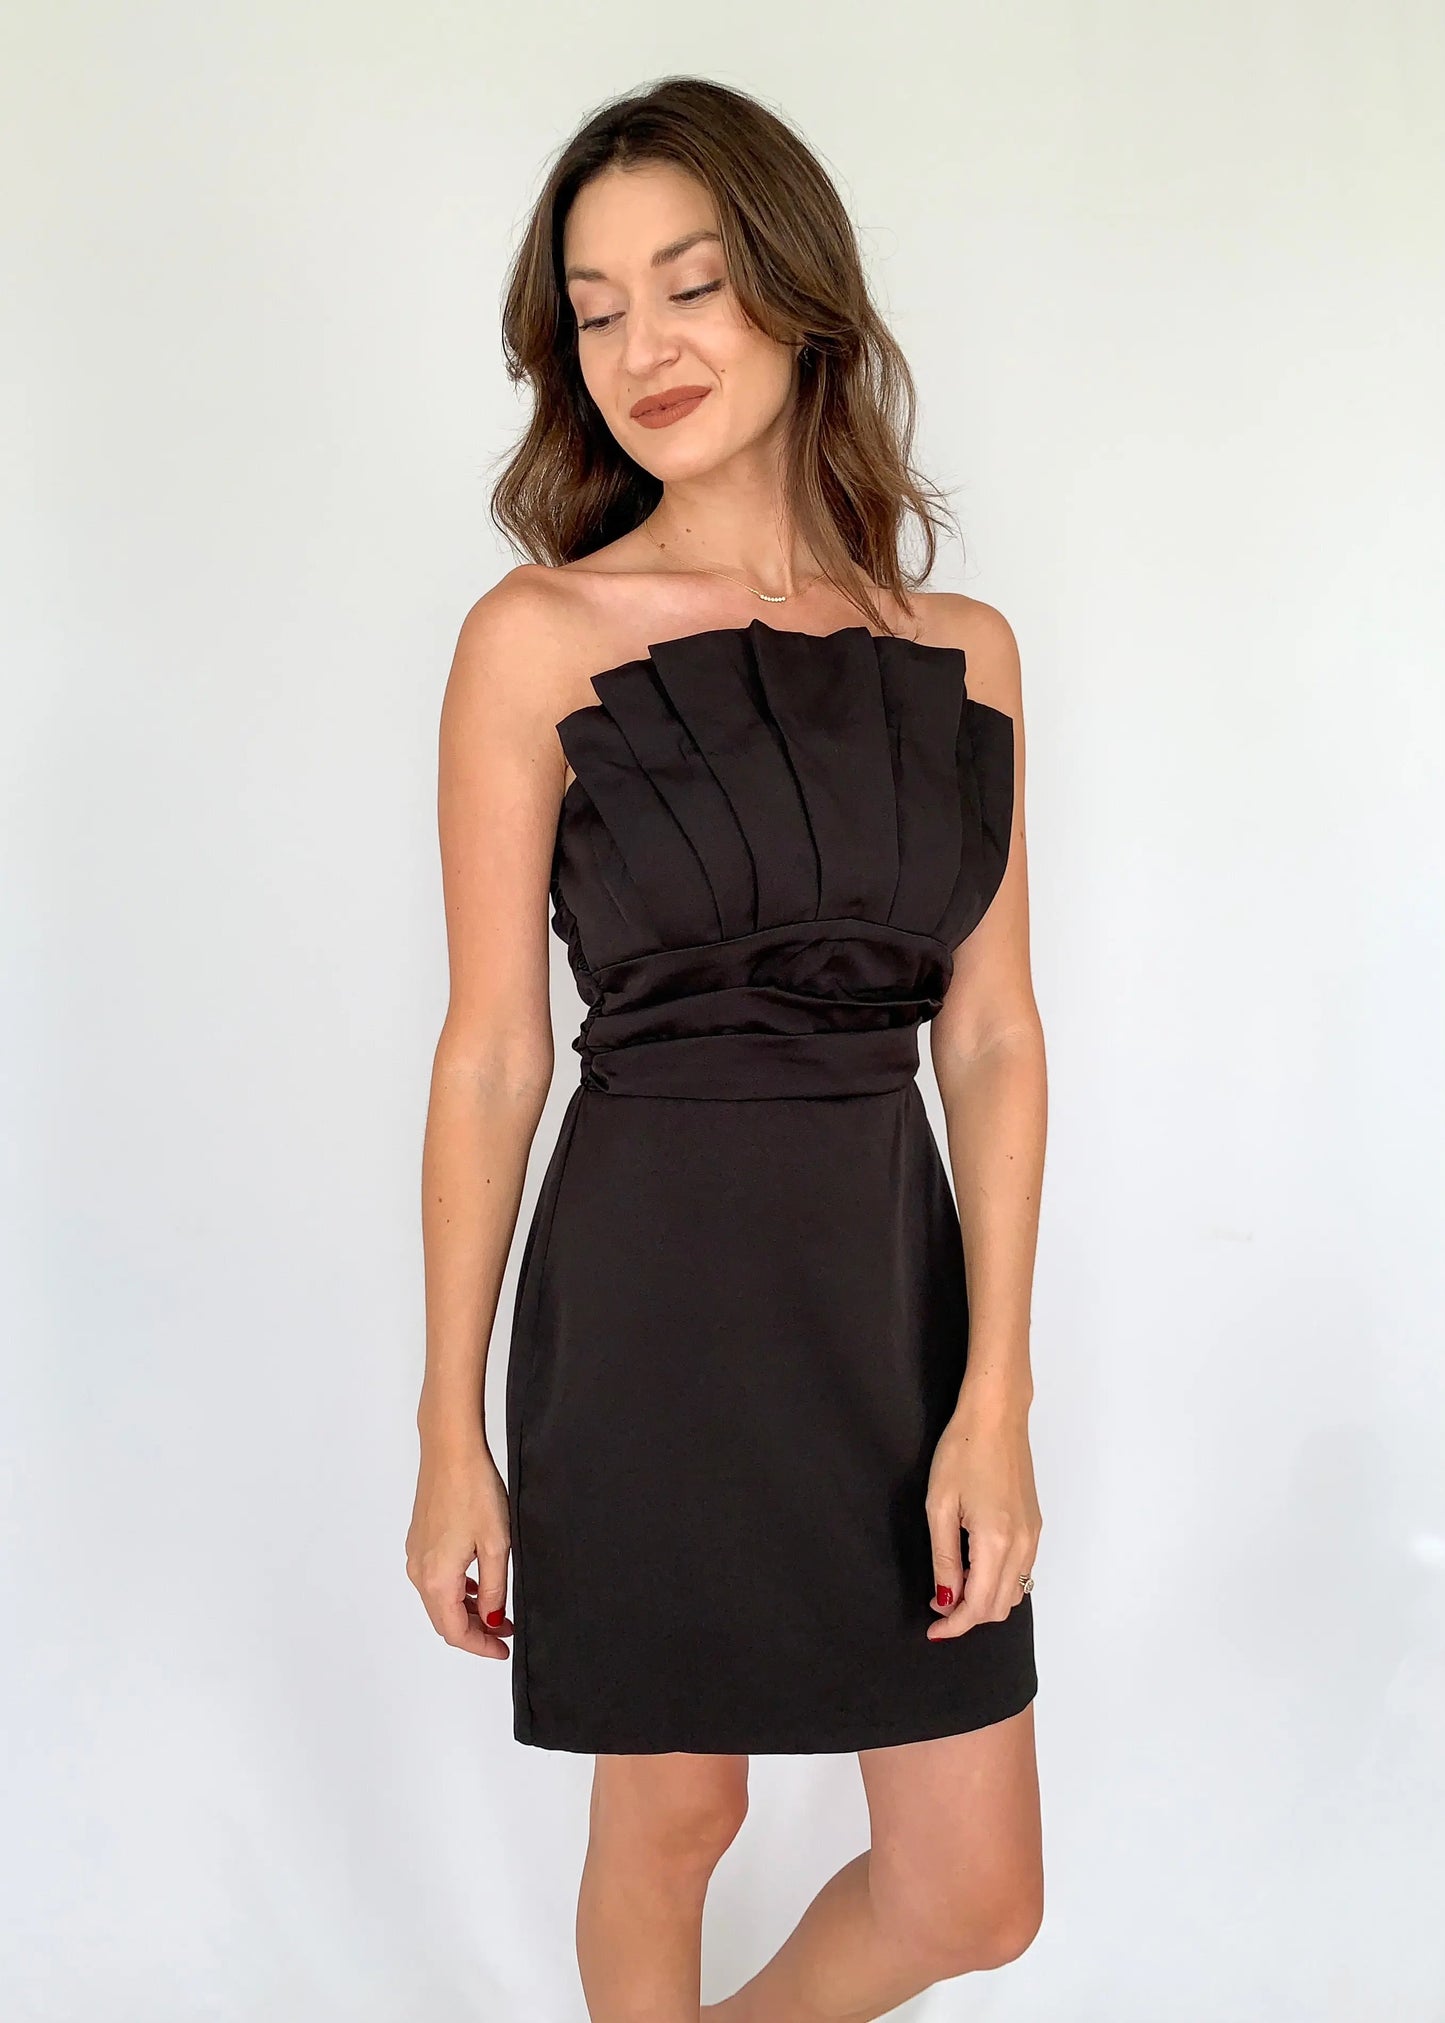 The Tiny Details Strapless Black Pleated Top Detail Dress